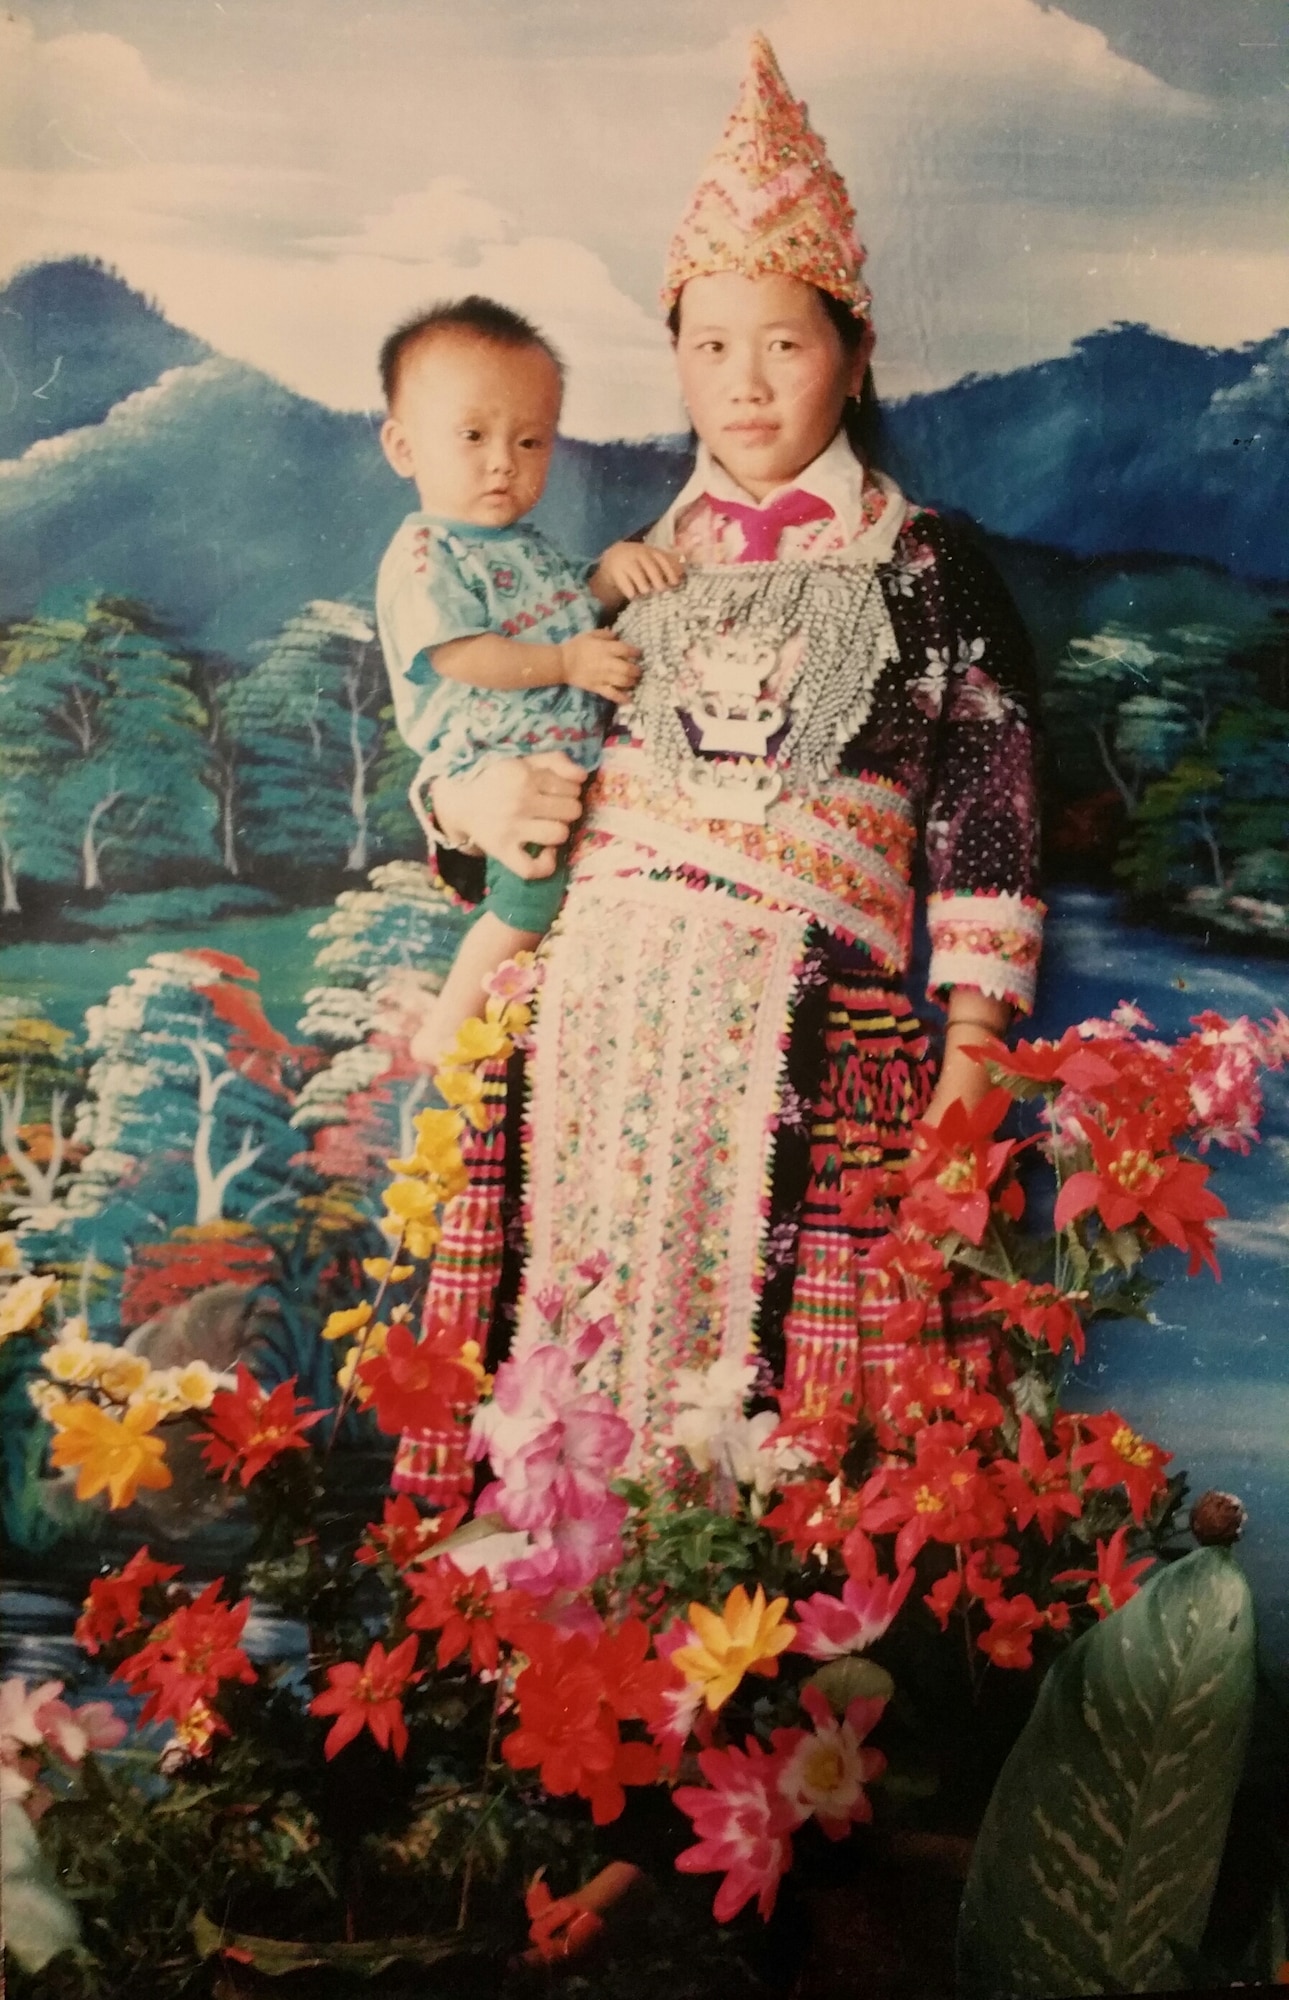 Senior Airman Yia Thao, age 1, poses for a portrait with his mother, Mai Song Her, in traditional Hmong ceremonial attire worn for significant events. (Courtesy photo)